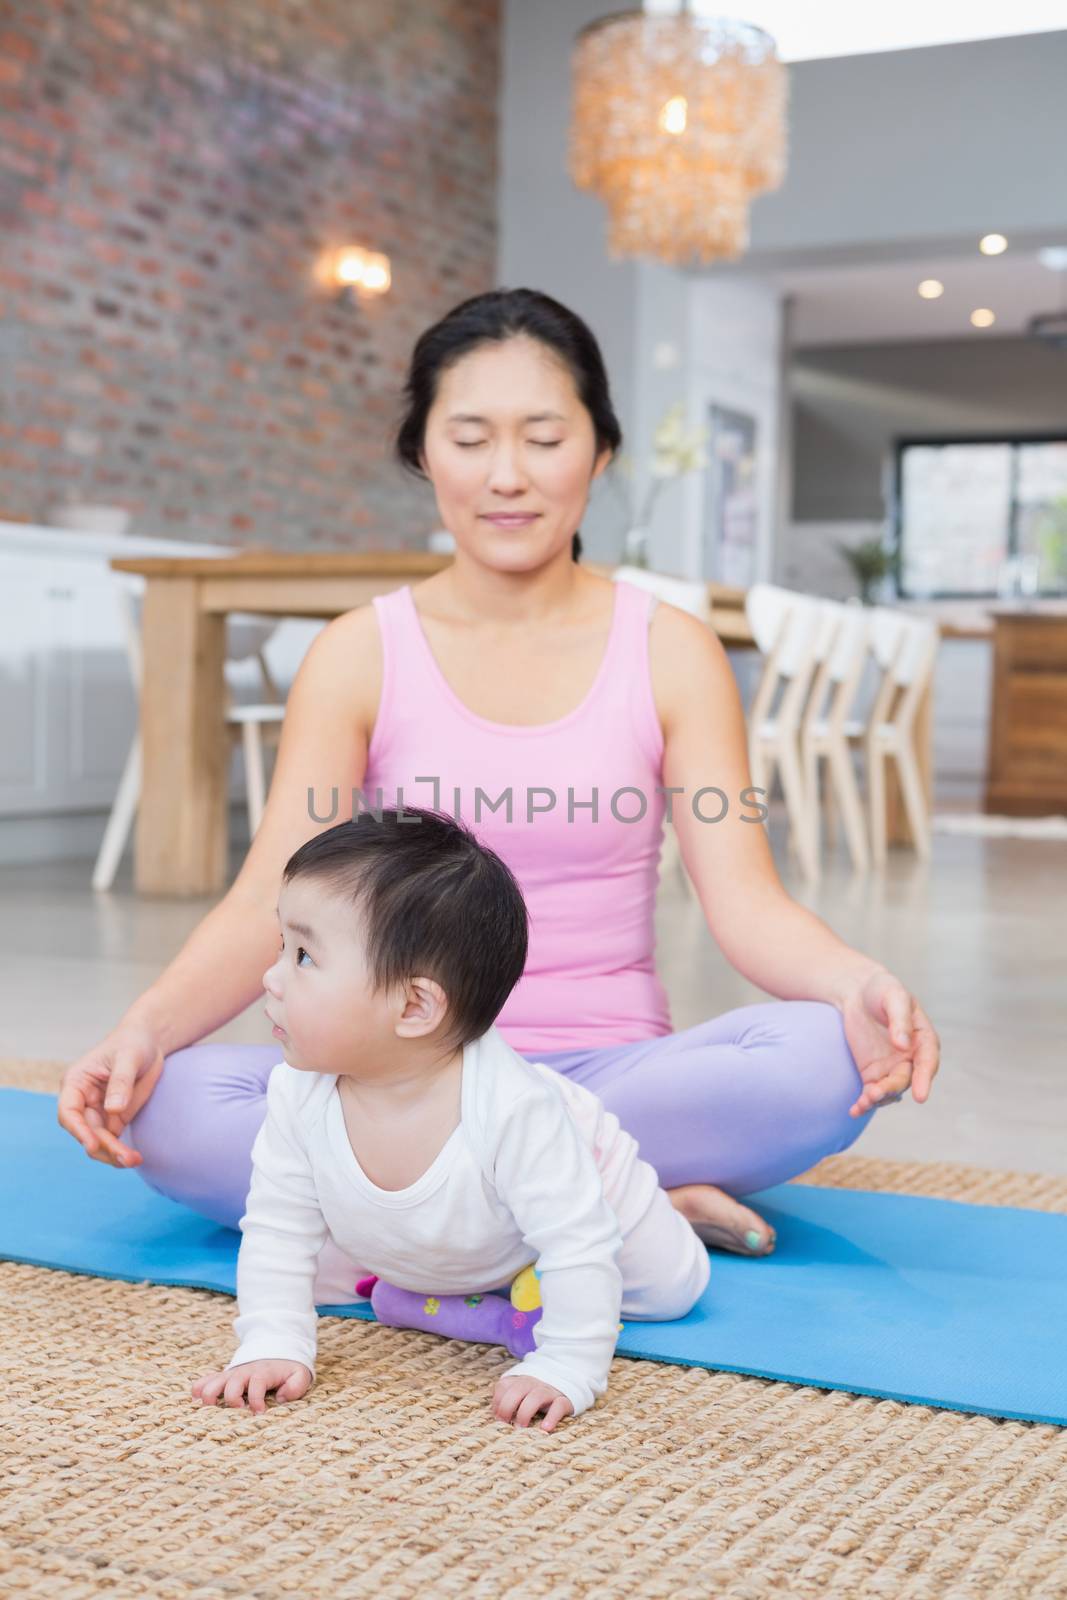 Calm mother meditating on mat at home while baby daughter is looking around